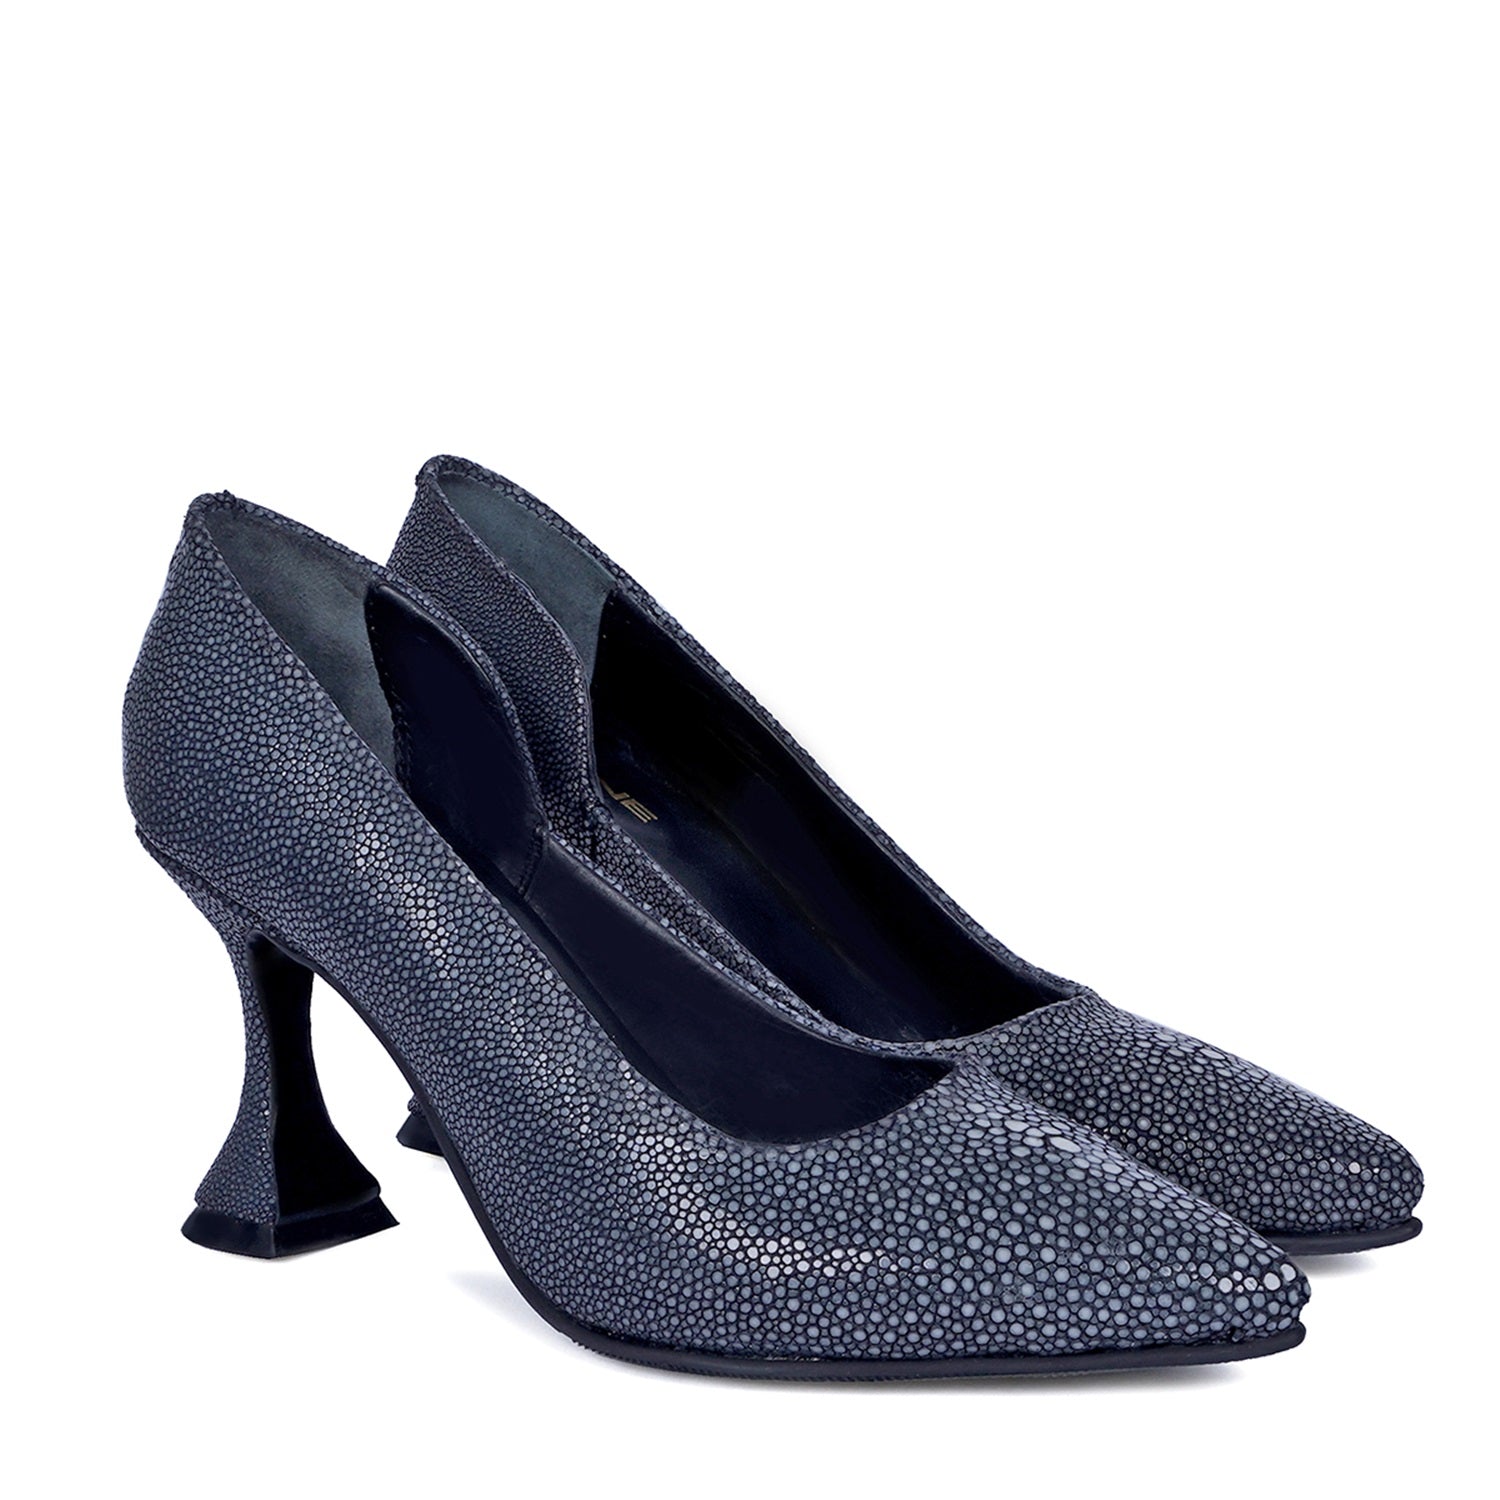 Buy Black Heeled Shoes for Women by ELLE Online | Ajio.com